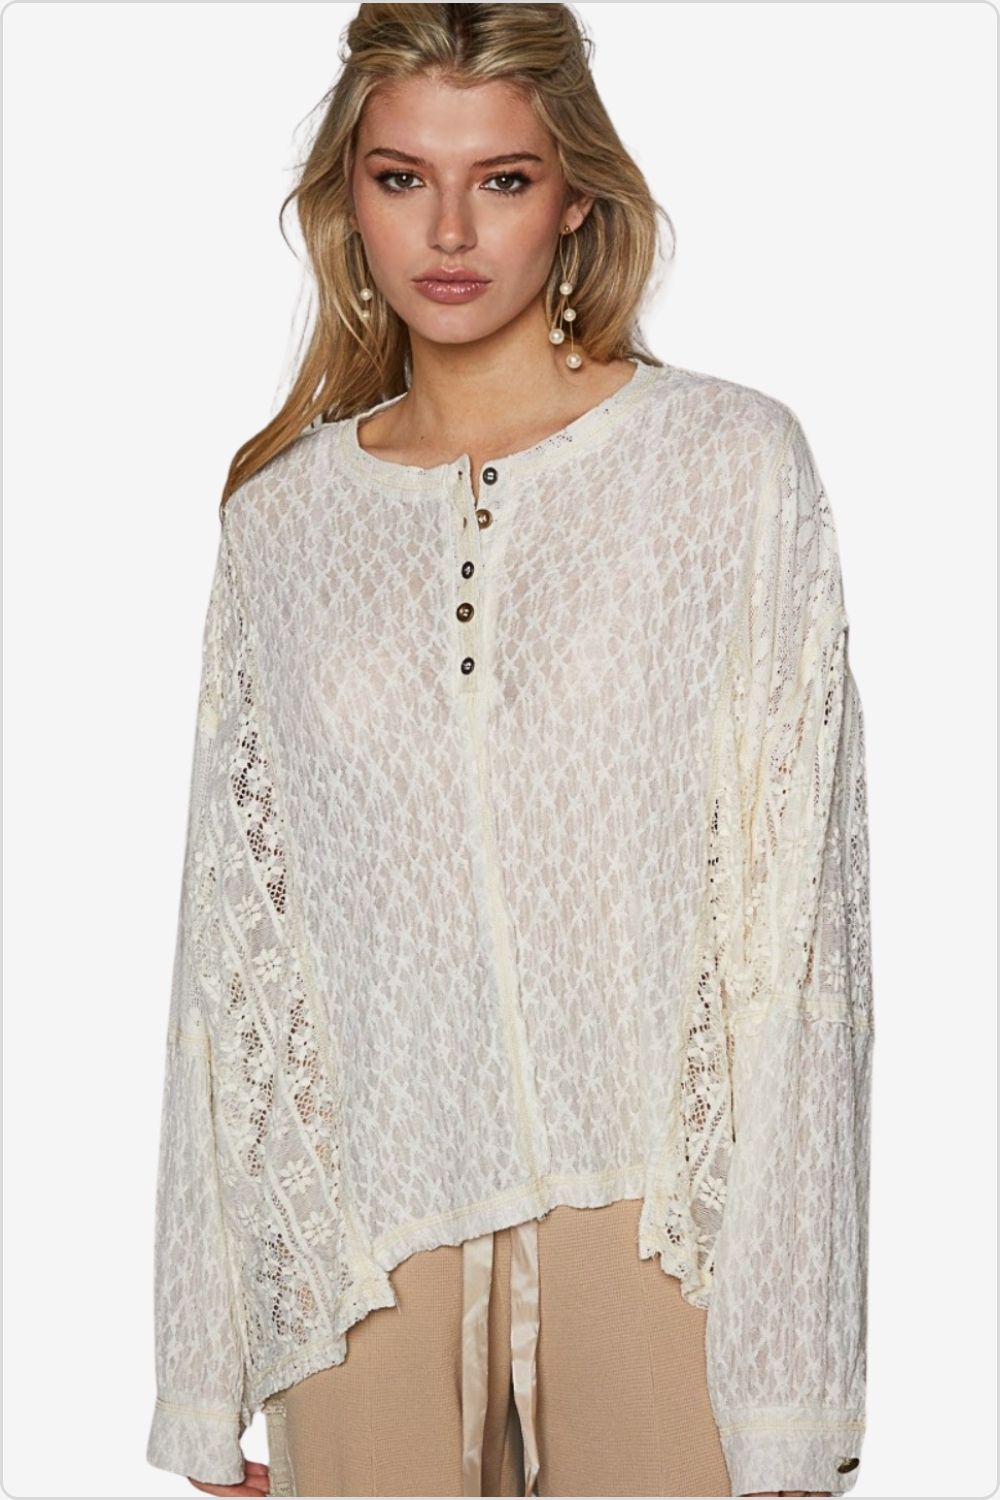 Elegant front view of a woman wearing a lace-detail long sleeve top, perfect for versatile styling, Color Cream